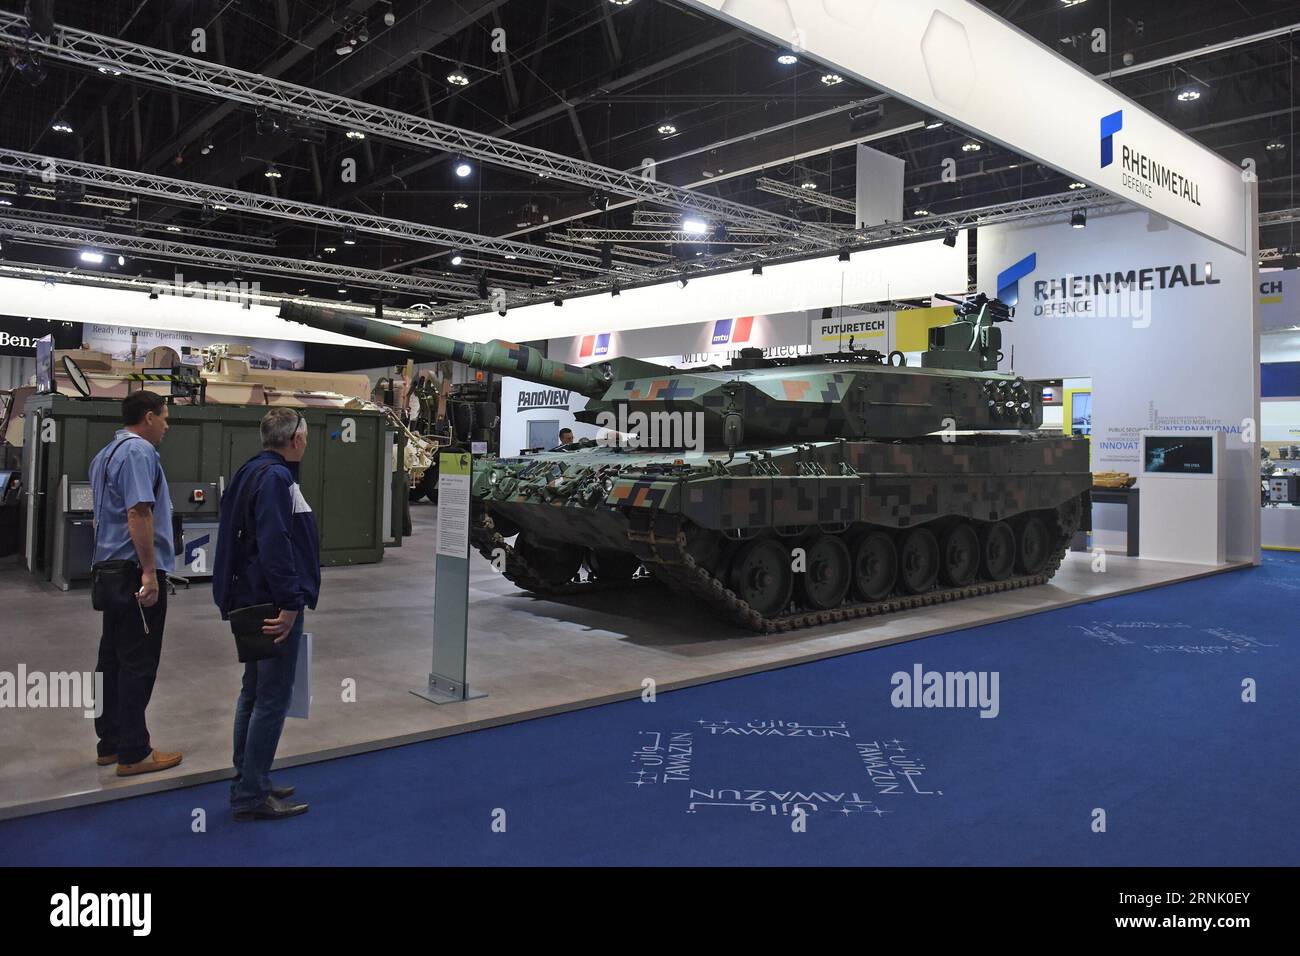 Unternehmen: Rheinmetall AG Sicherheits- und Rüstungsgütermesse IDEX in Abu Dhabi 170224 -- ABU DHABI, Feb. 24, 2017 -- Visitors look at a tank displayed at the Rheinmetall exhibition area at the 13th edition of the International Defense Exhibition and Conference IDEX, in Abu Dhabi, the United Arab Emirates, on Feb. 23, 2017. The five-day biennial defense fair ended here Thursday with deals valued at 19.2 billion dirham 5.26 billion U.S. dollars, according to the official data.  zw UAE-ABU DHABI-IDEX ZhaoxDingzhe PUBLICATIONxNOTxINxCHN Stock Photo